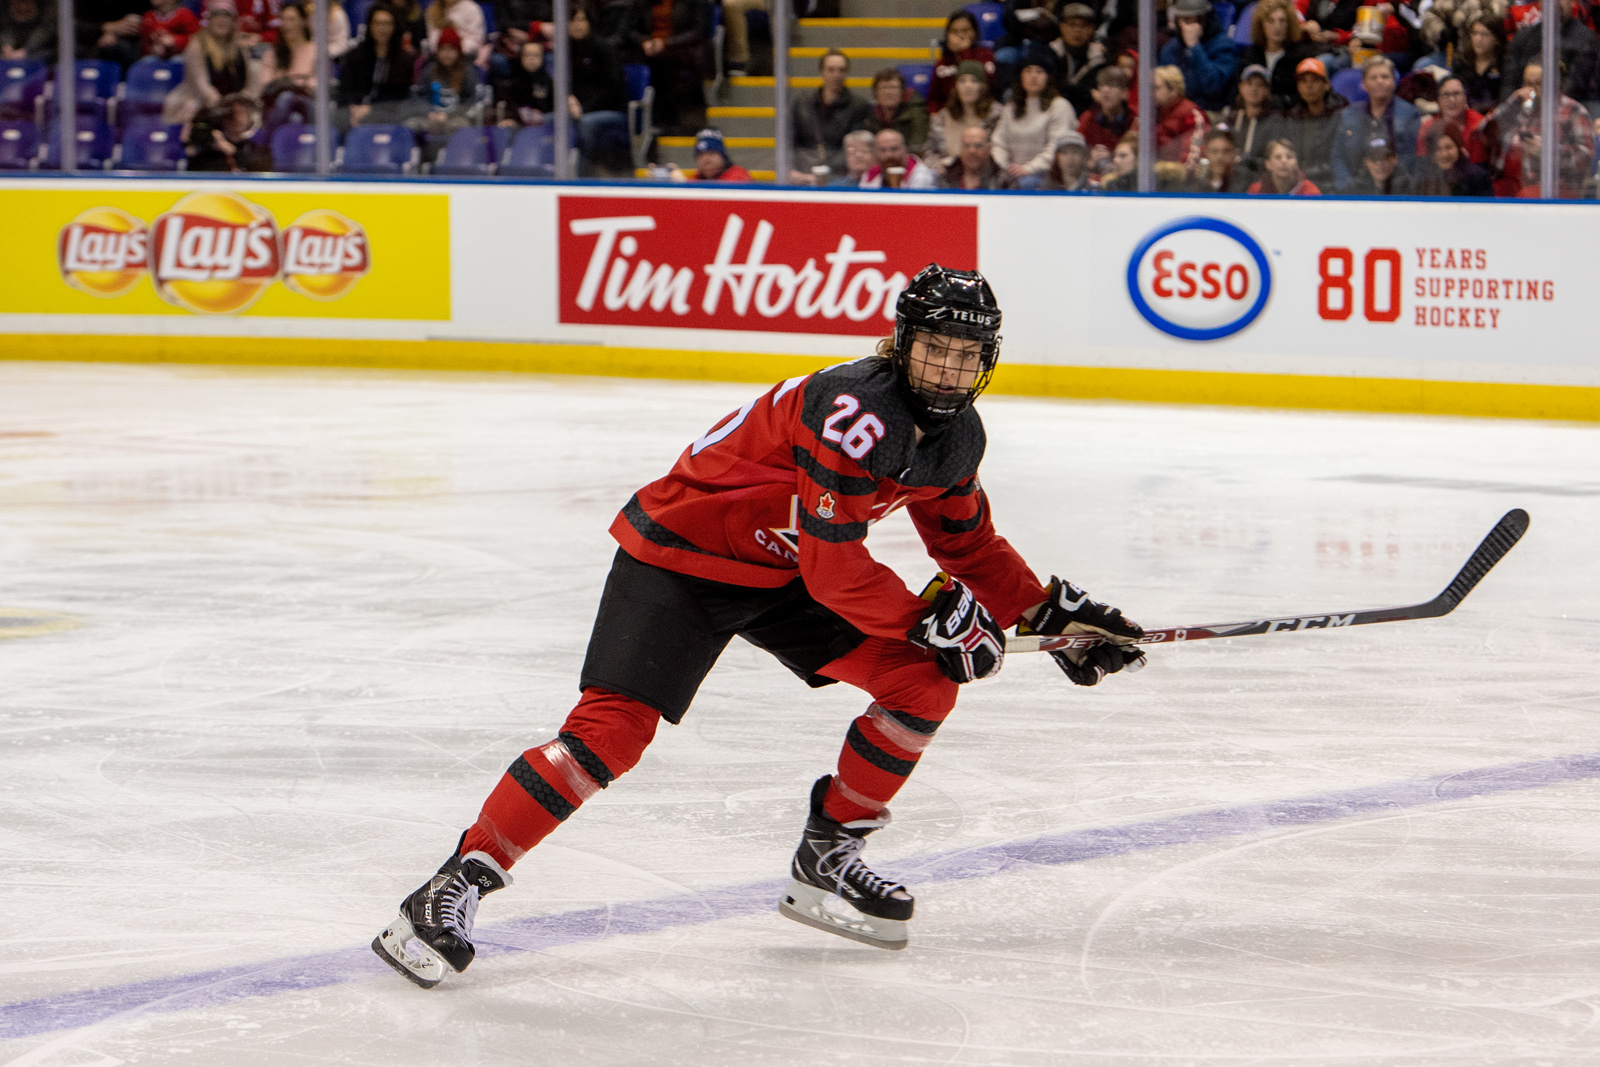 Clark, Canada set to do battle on world stage